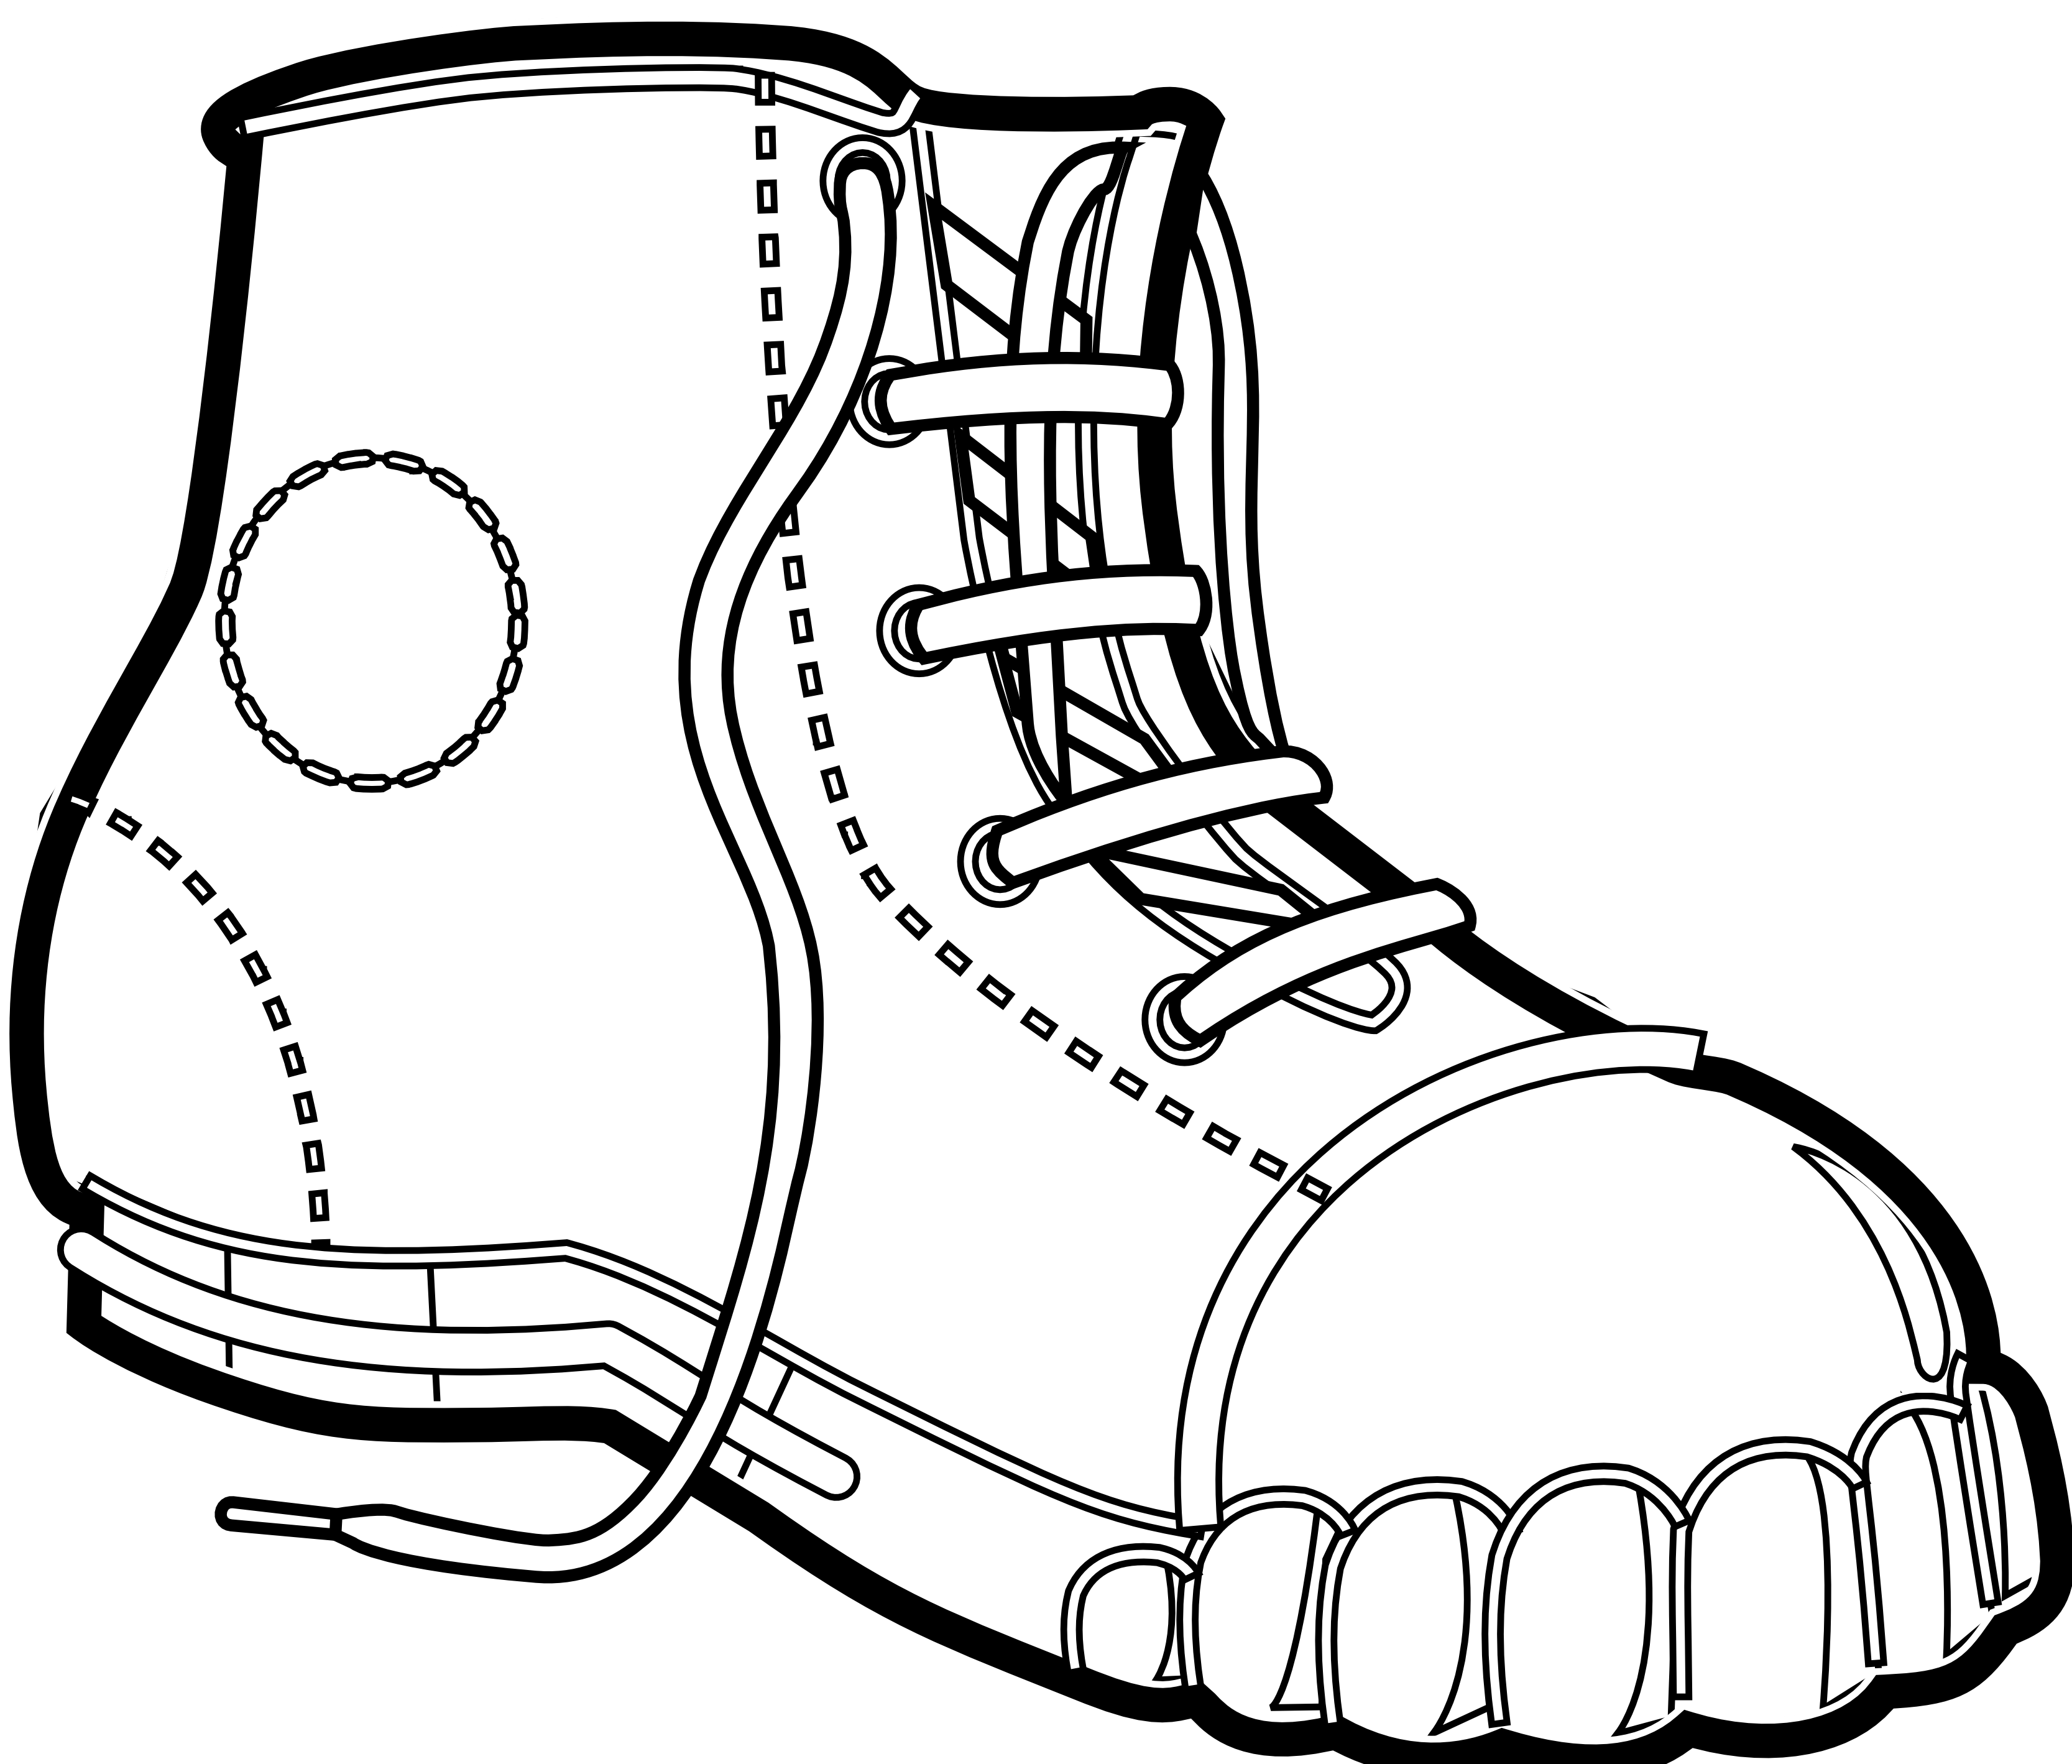  collection of hiking. Winter clipart shoe